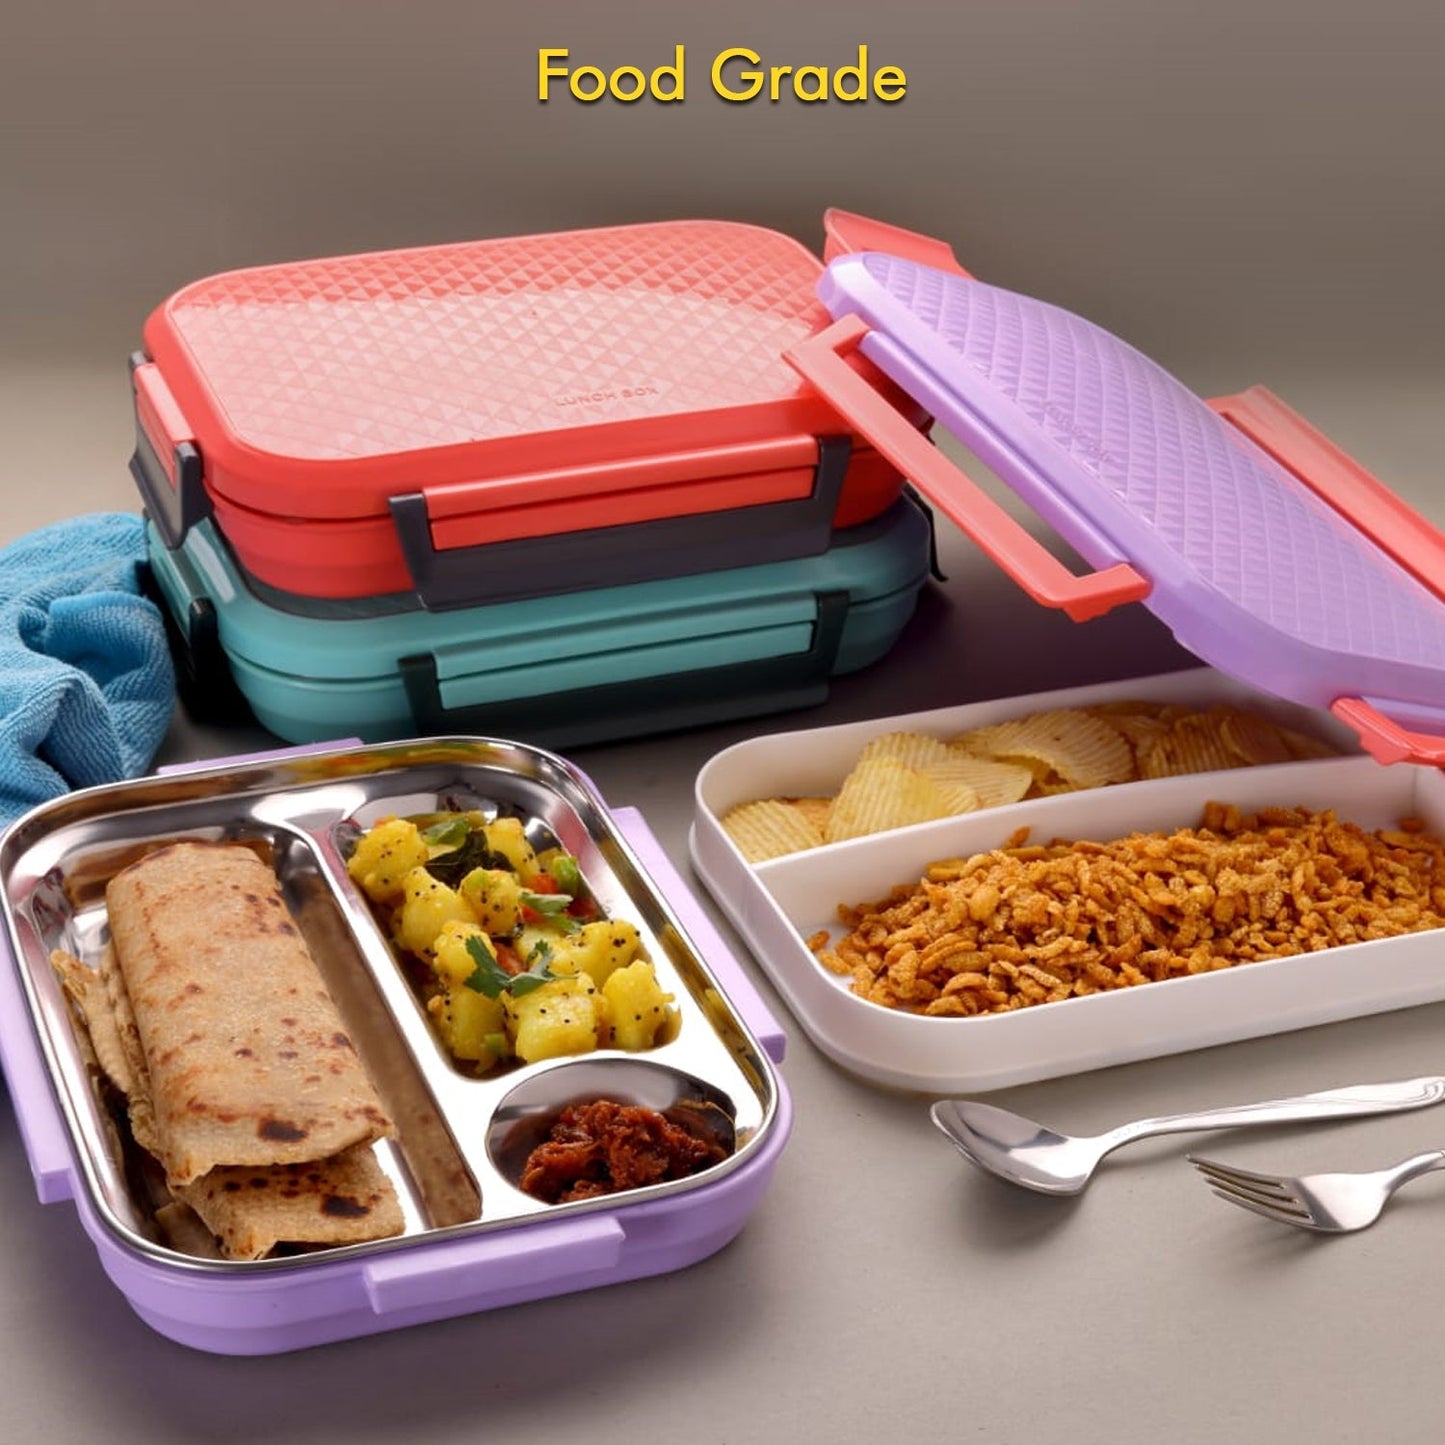 5365 Lunch Box Plastic with steel plate, small lunch box High Quality Box For Kids School Customized Plastic Lunch Box for Girls & Boy JK Trends